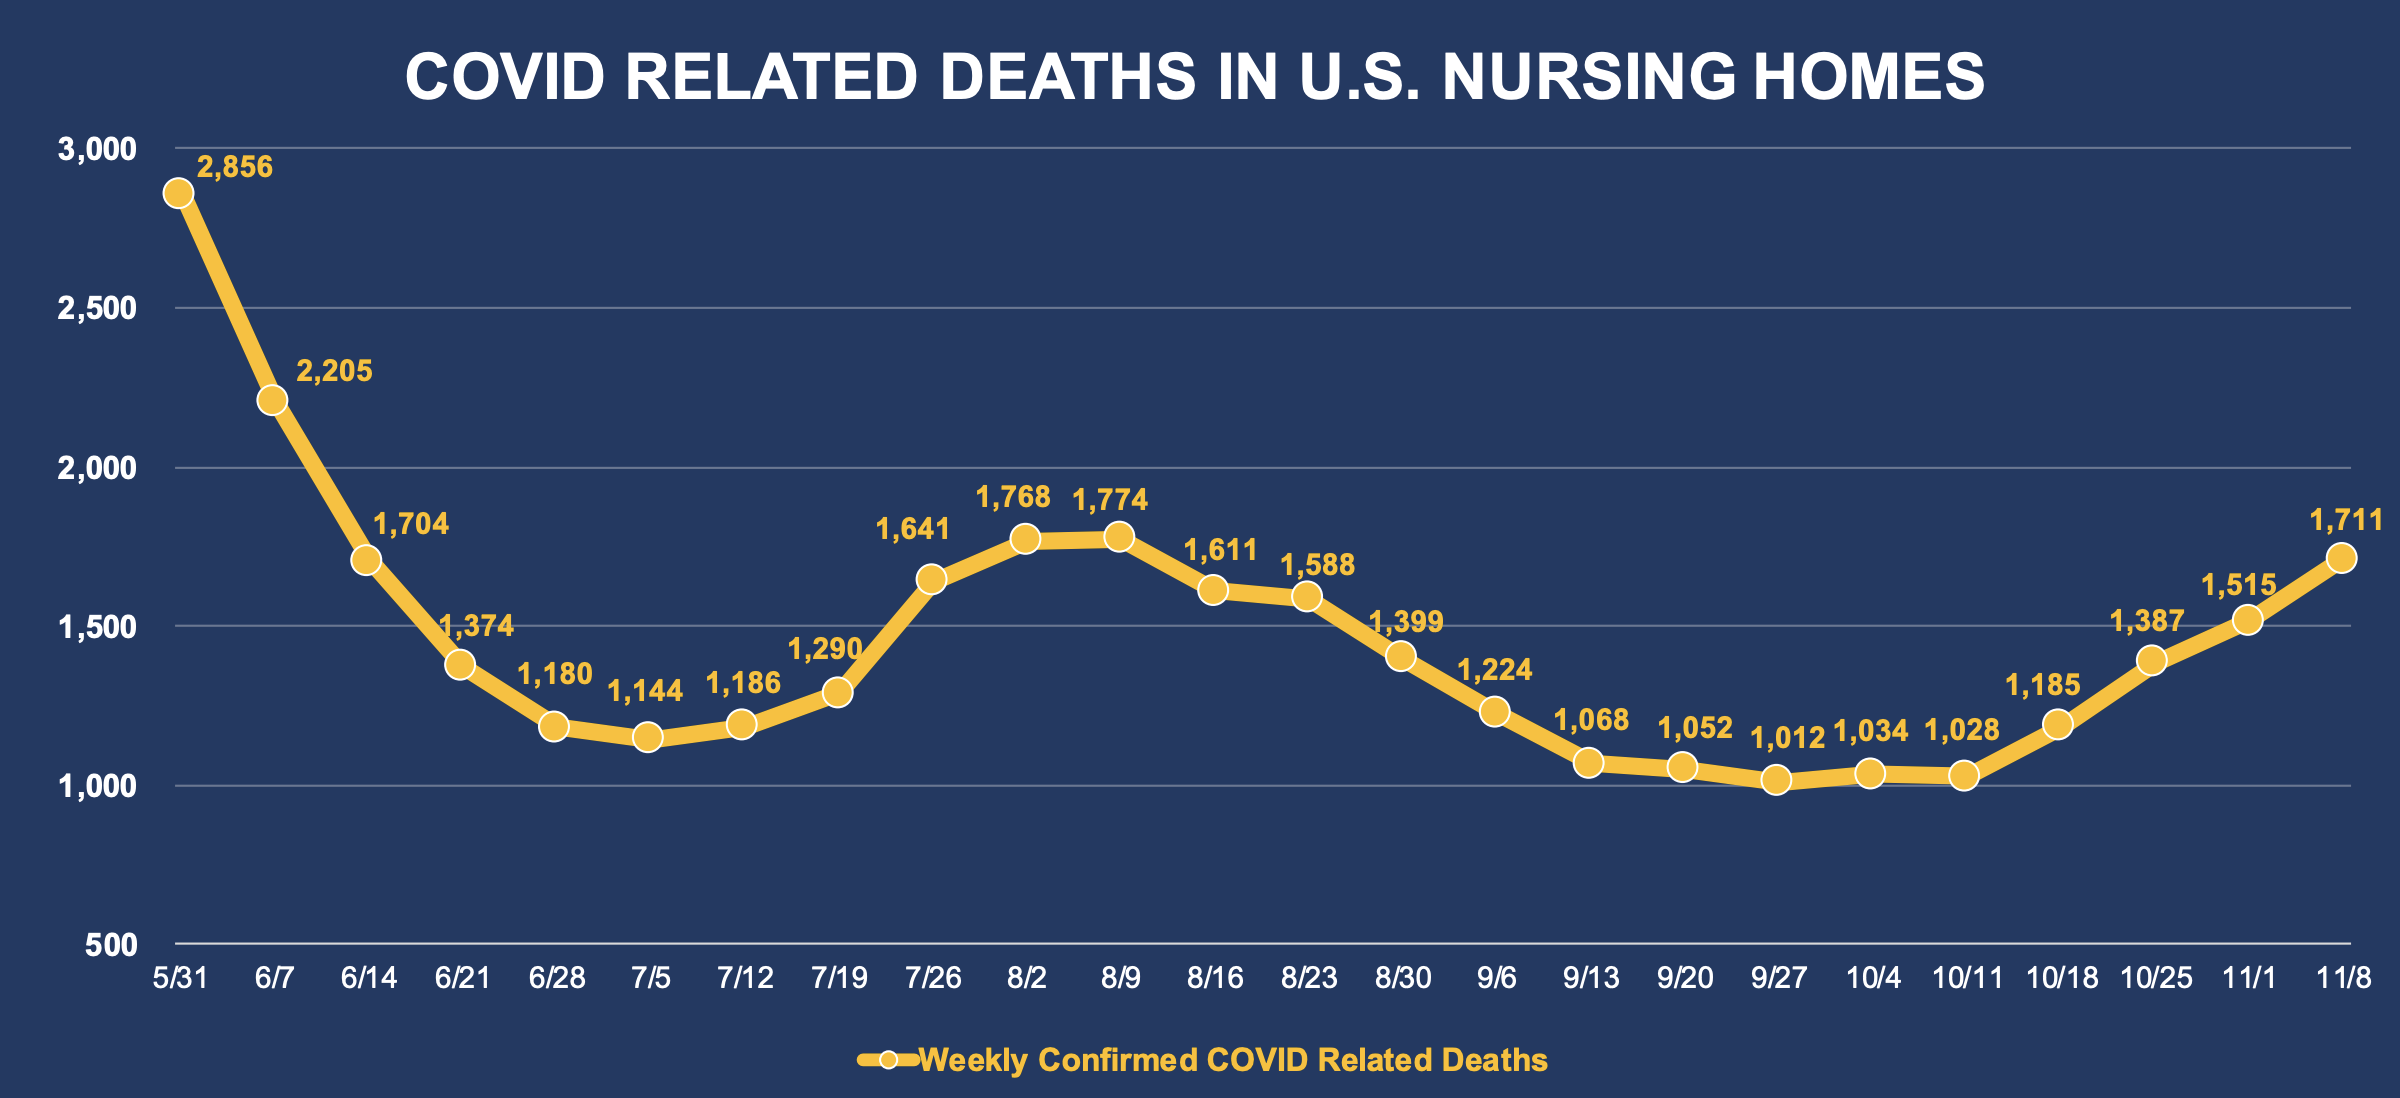 COVID Related Deaths In U.S. Nursing Homes